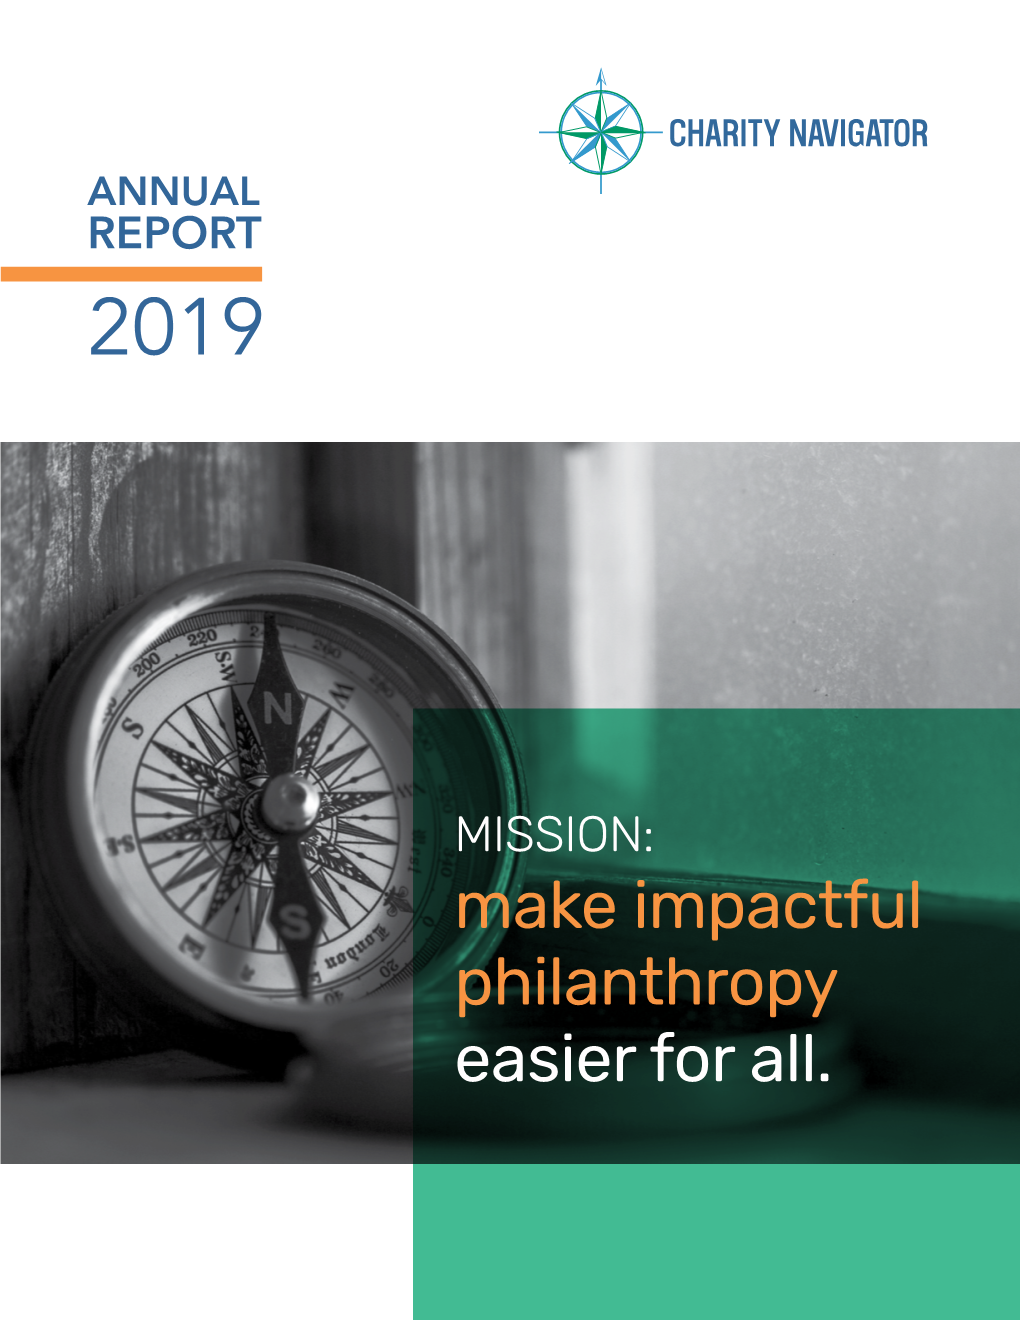 Make Impactful Philanthropy Easier for All. Together, We Have the Power to Transform the Charitable Sector, Making It More Inclusive, Vibrant, and Effective